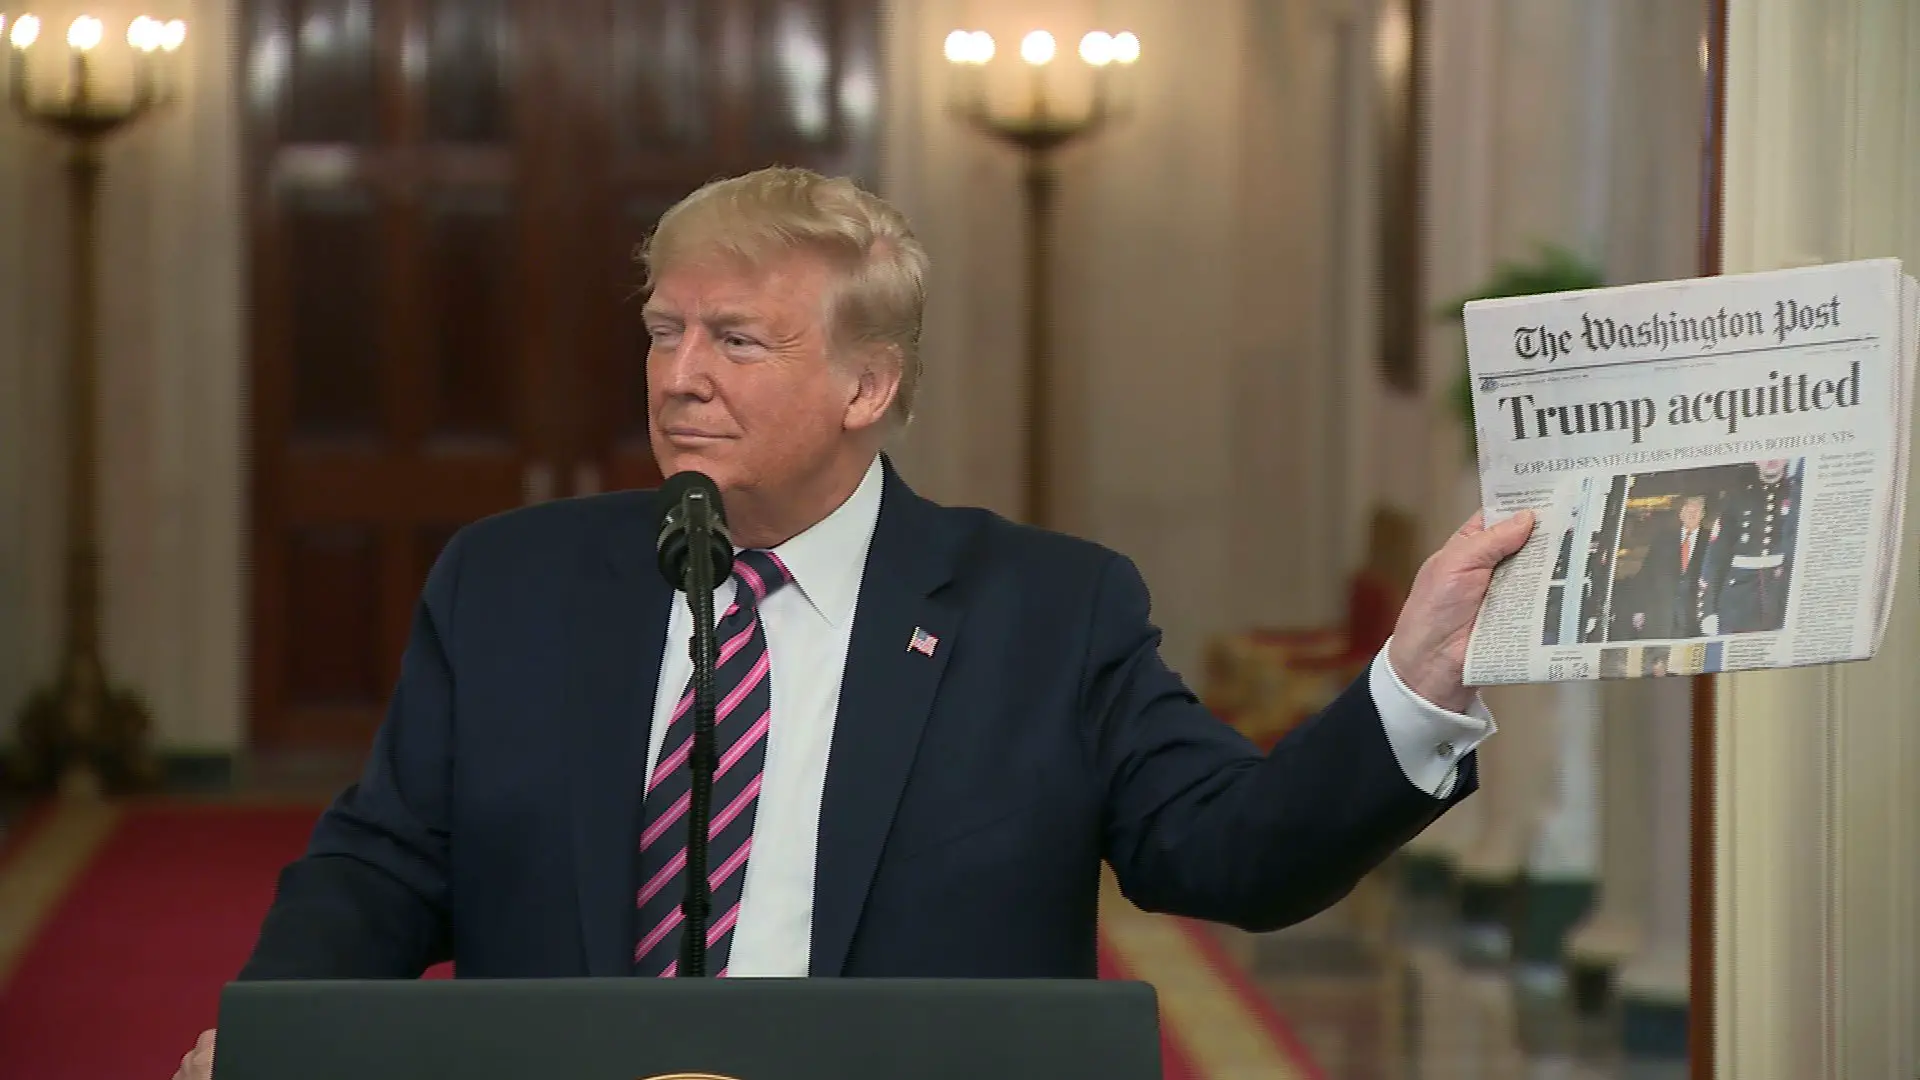 President Trump holds up newspaper with headline " Trump acquitted" 